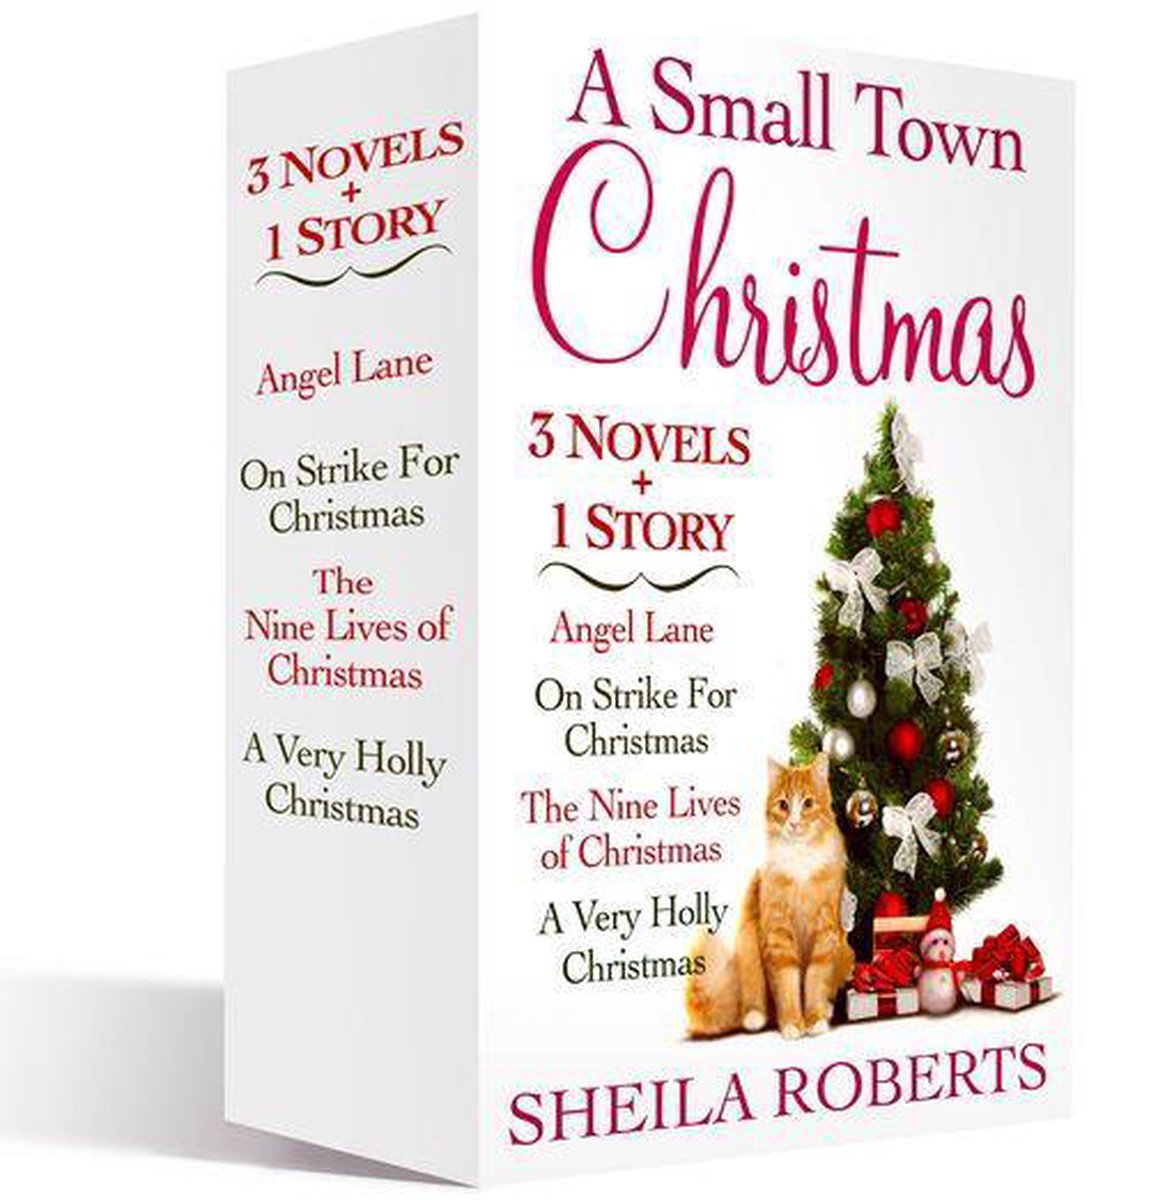 A Small Town Christmas, 3 Novels and 1 Story - Sheila Roberts